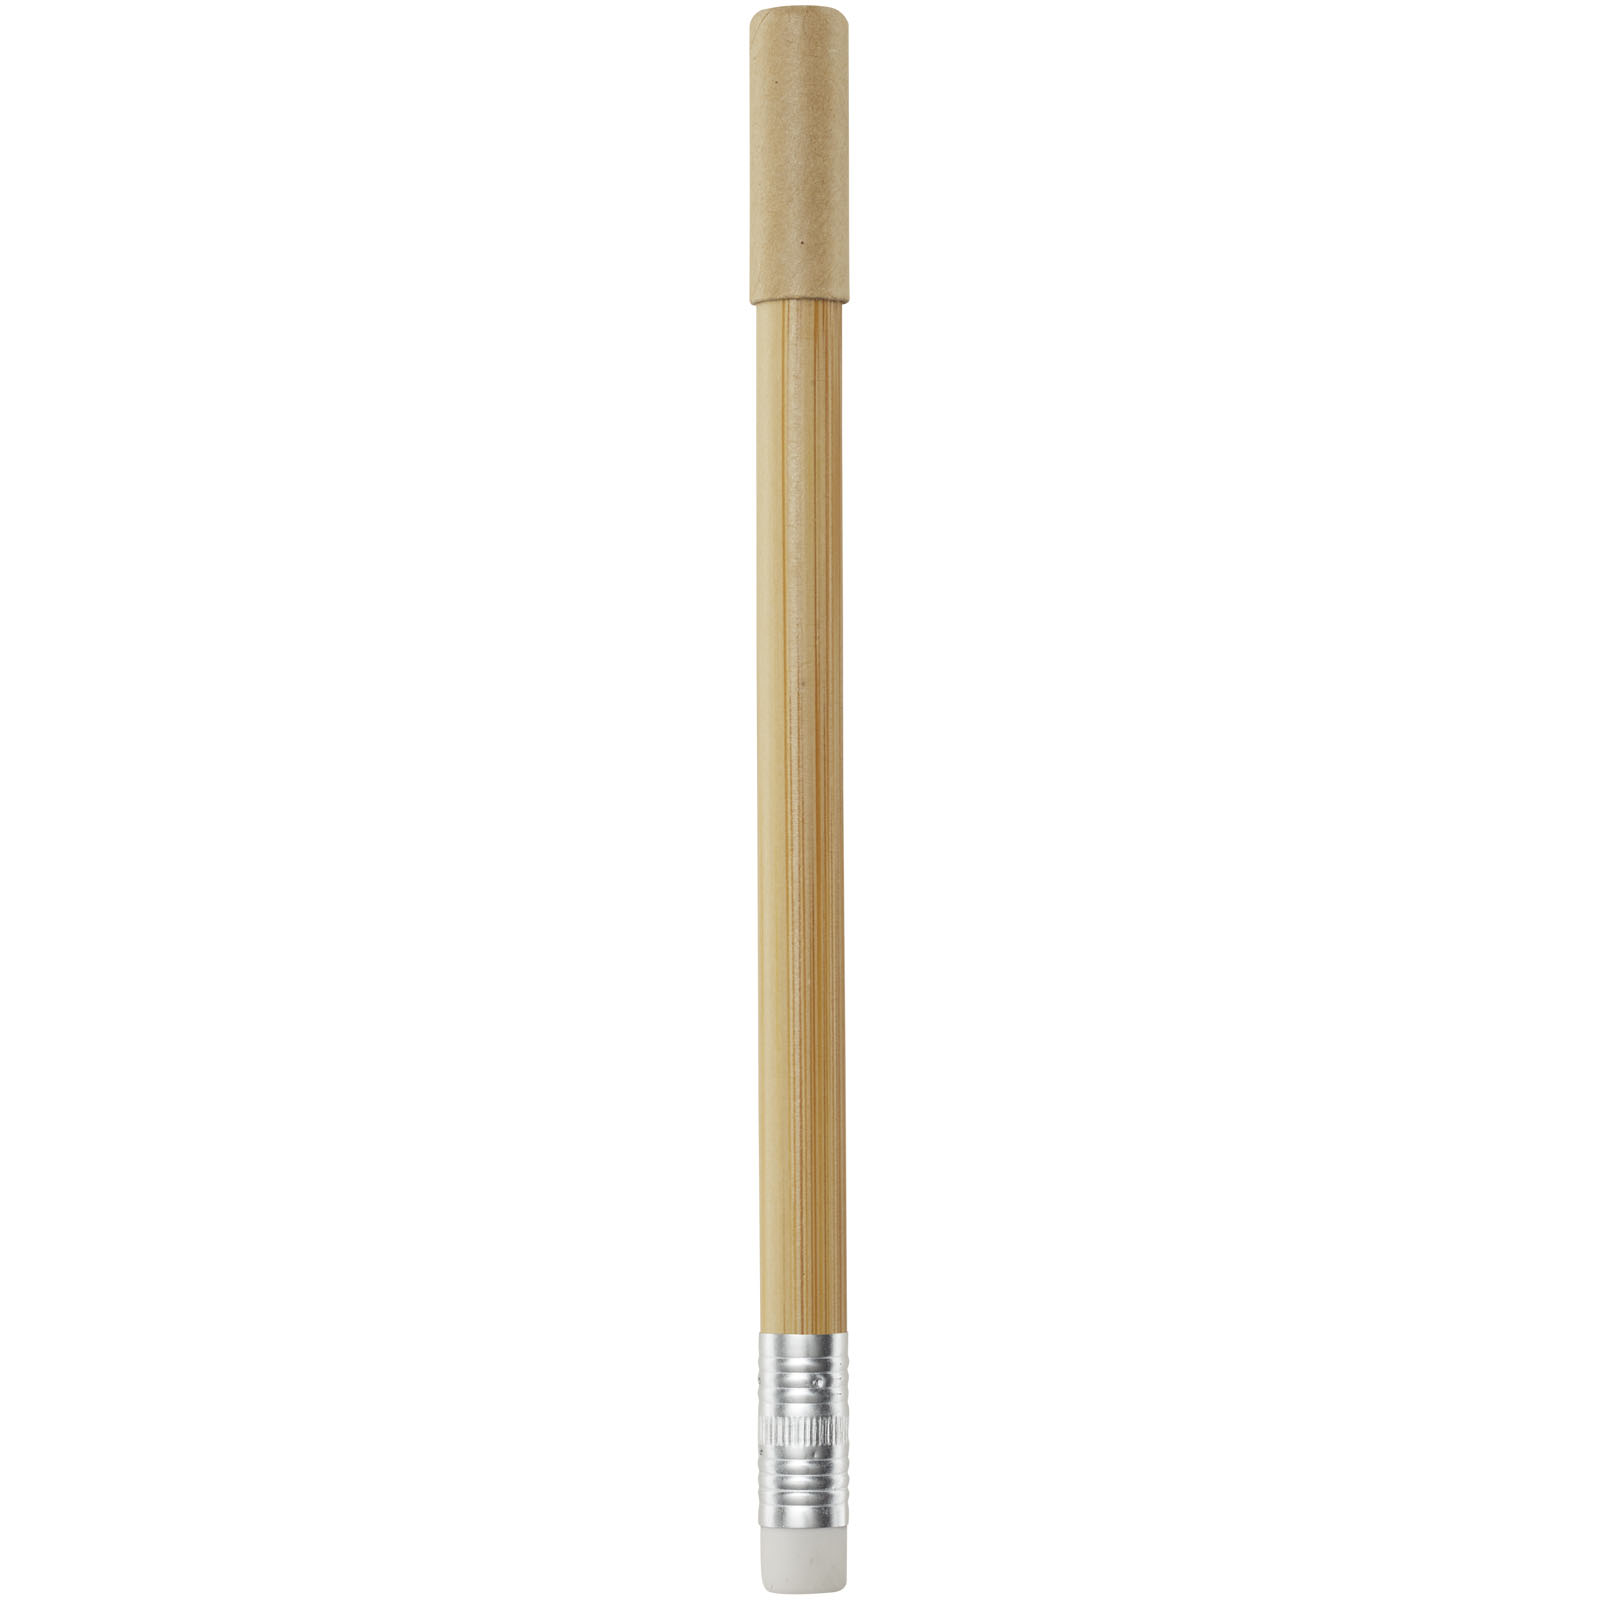 Advertising Other Pens & Writing Accessories - Krajono bamboo inkless pen  - 0